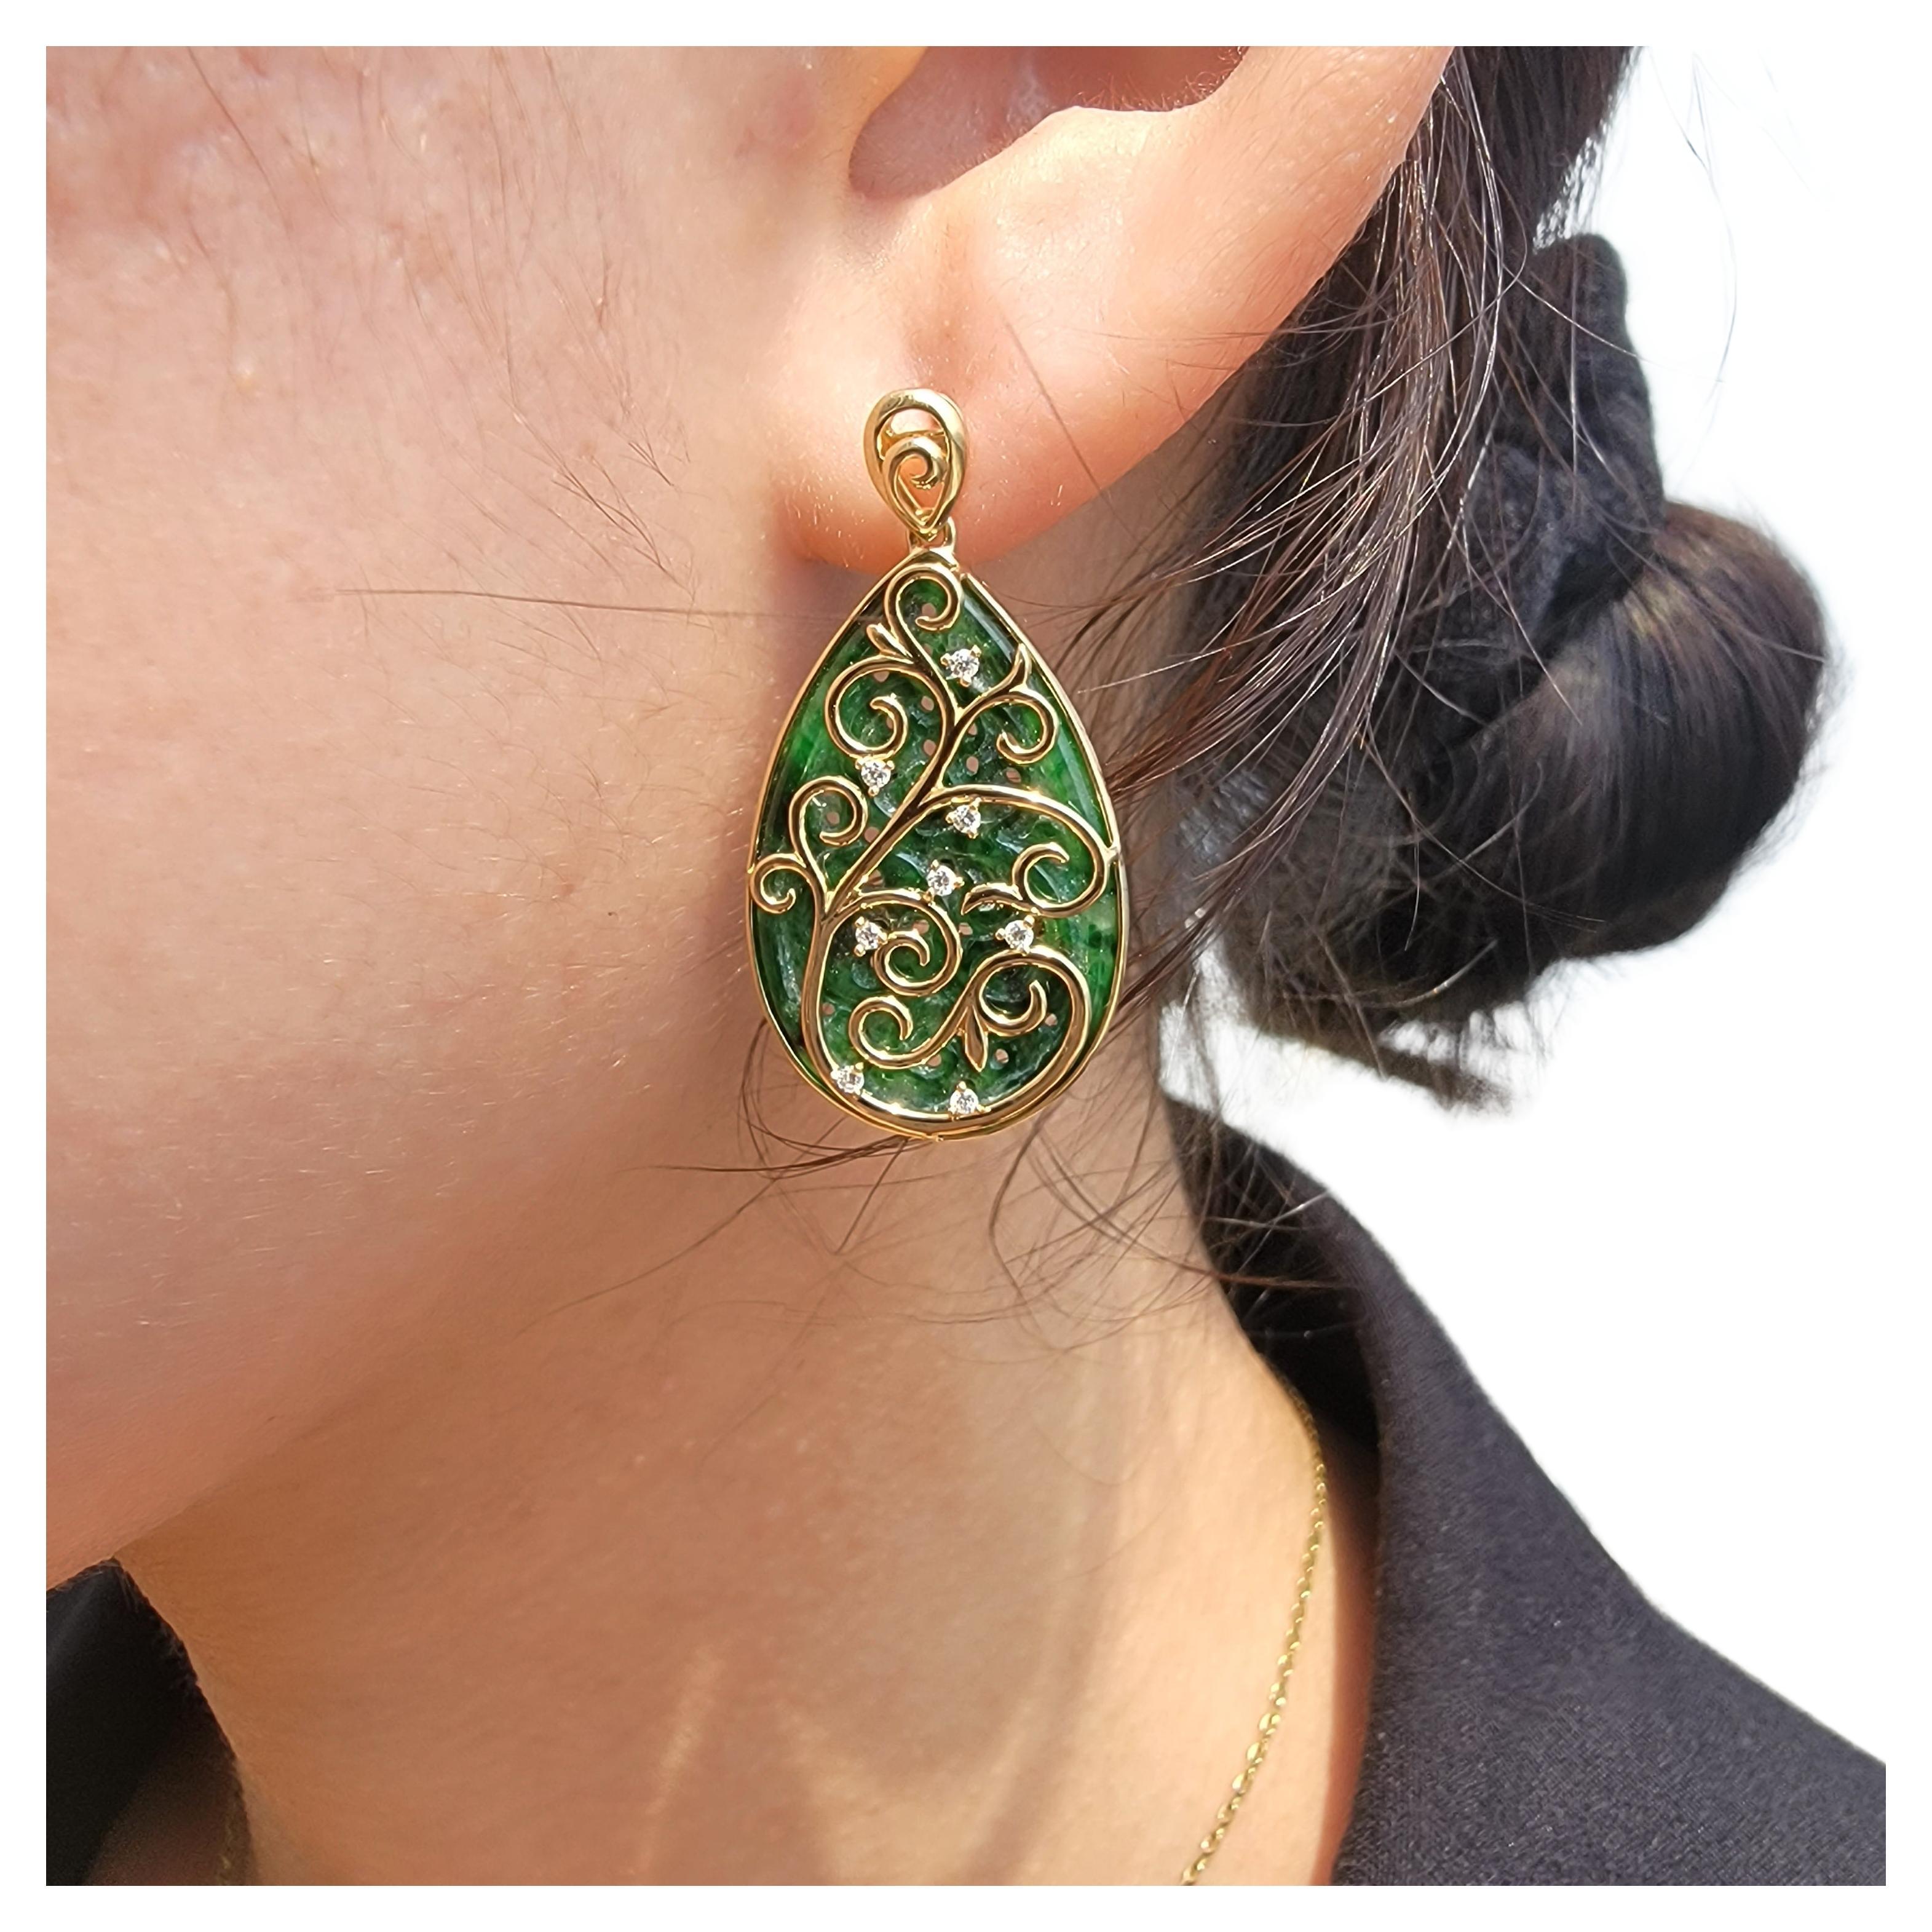 These Earrings are designed by our founder, and hand carved by our expert artisans in our Hong Kong workshop. We use 18K Yellow Gold and top quality Diamonds to bring out the best in the Jade carvings. The luster and sparkle of diamonds, the warmth